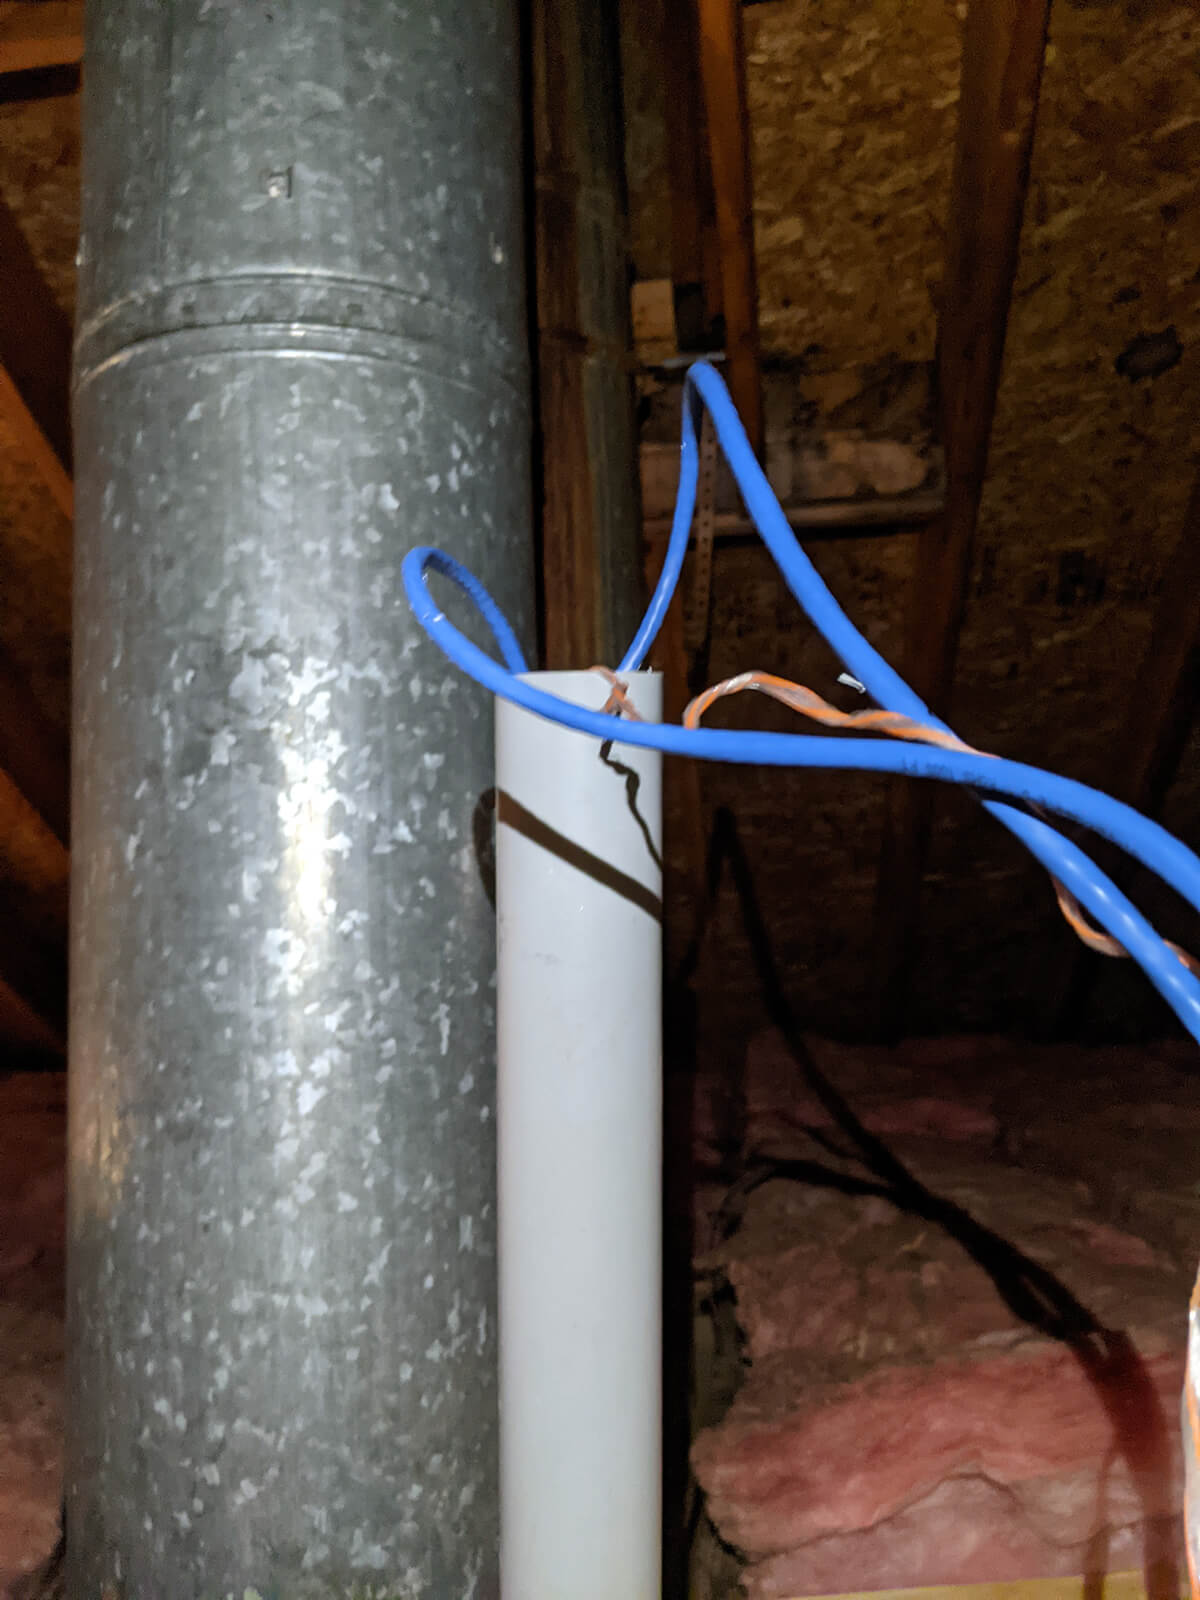 First two cables pulled up through the PVC